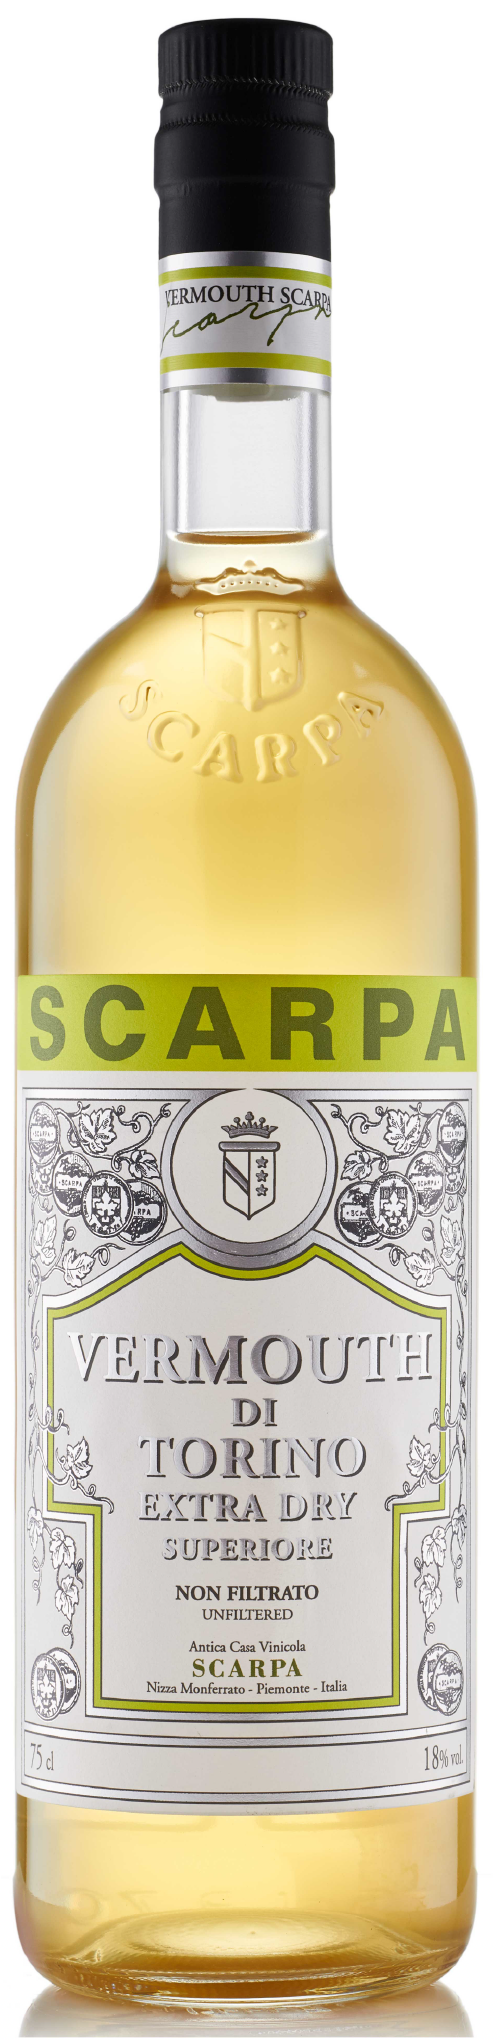 Scarpa, Vermouth di Torino, Extra Dry Superiore Unfiltered, NV, Piedmont, Italy (750ml)